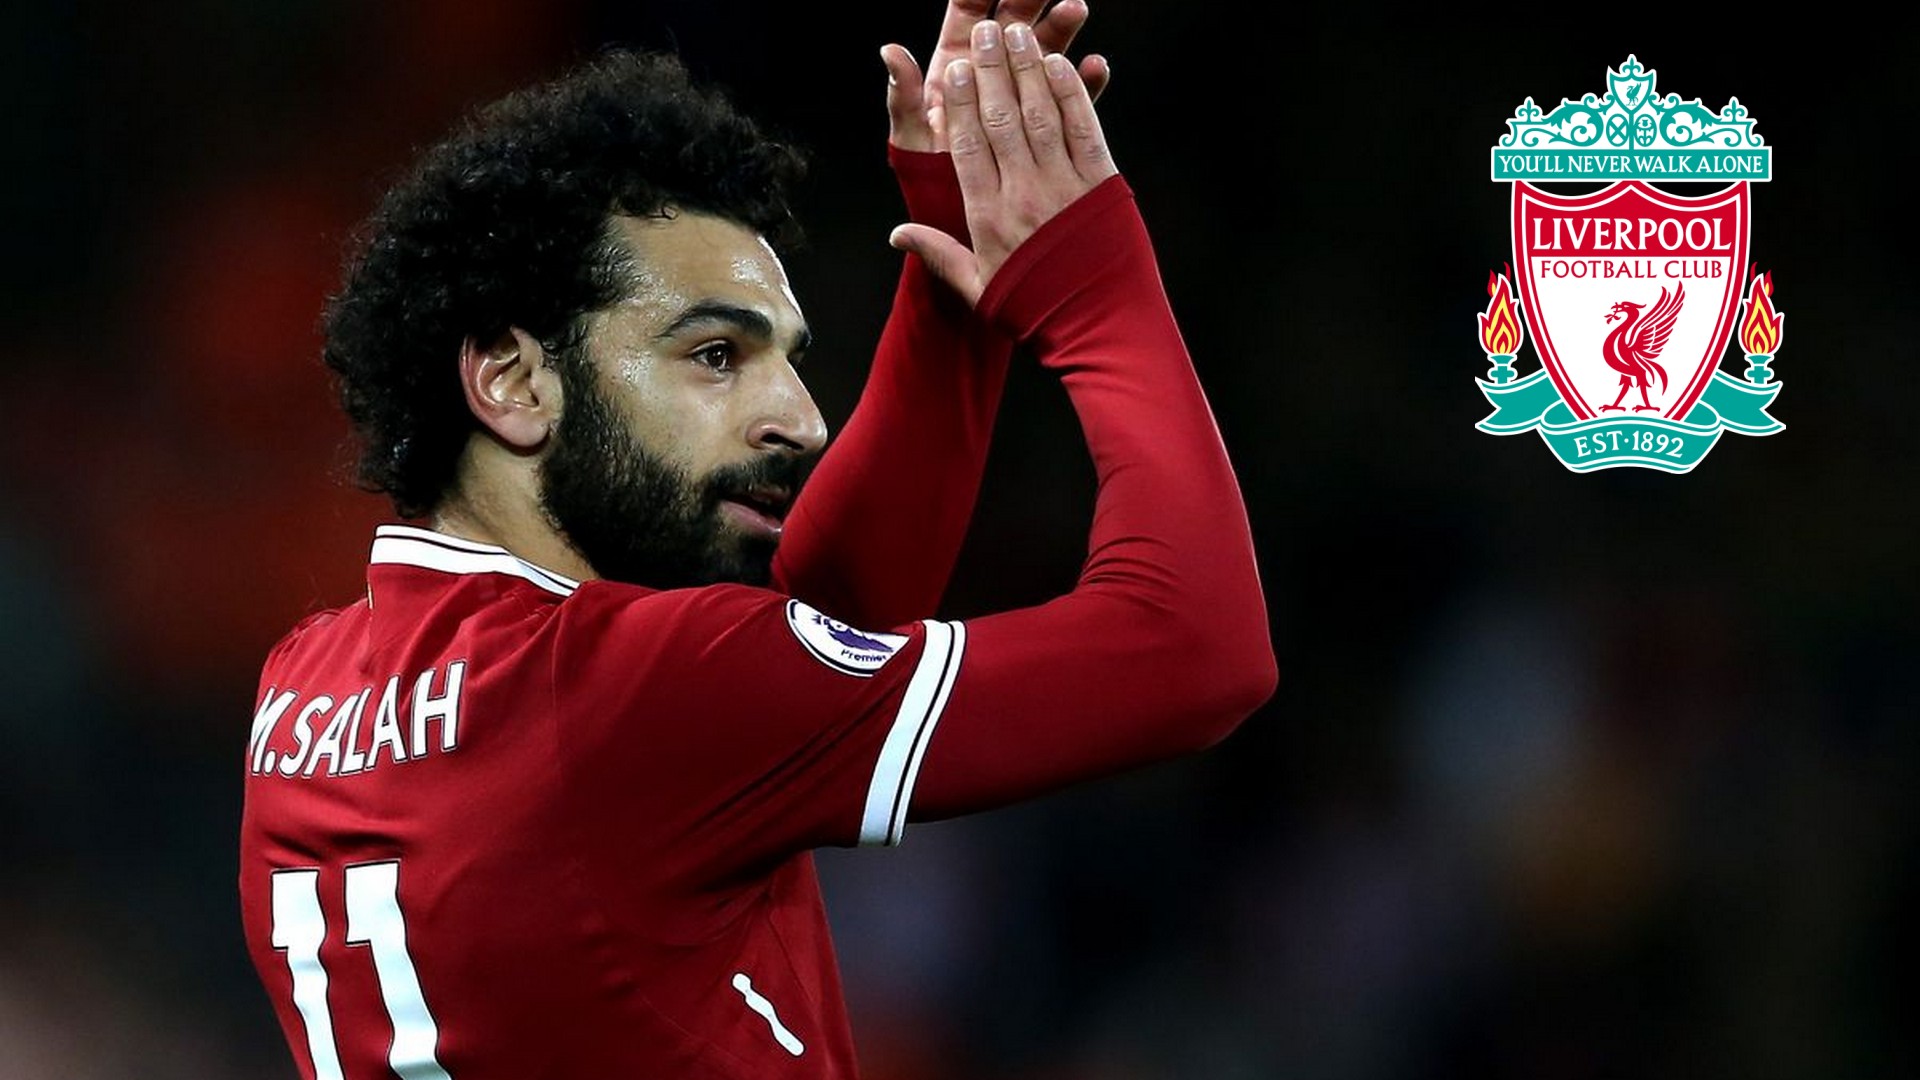 Wallpaper Mohamed Salah Desktop with resolution 1920X1080 pixel. You can use this wallpaper as background for your desktop Computer Screensavers, Android or iPhone smartphones